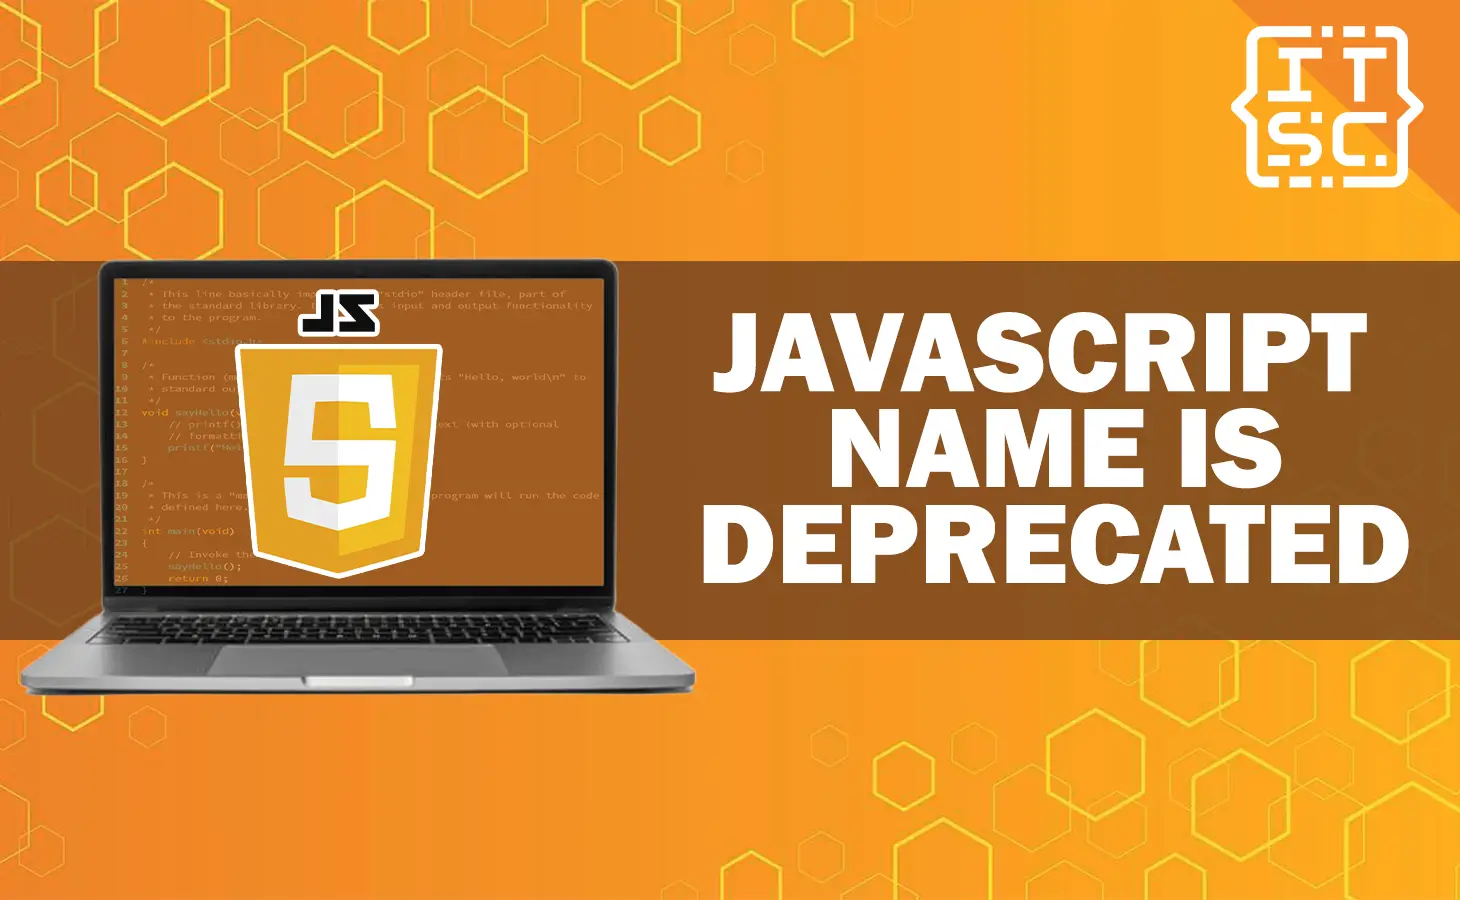 How to fix a deprecated name in JavaScript?